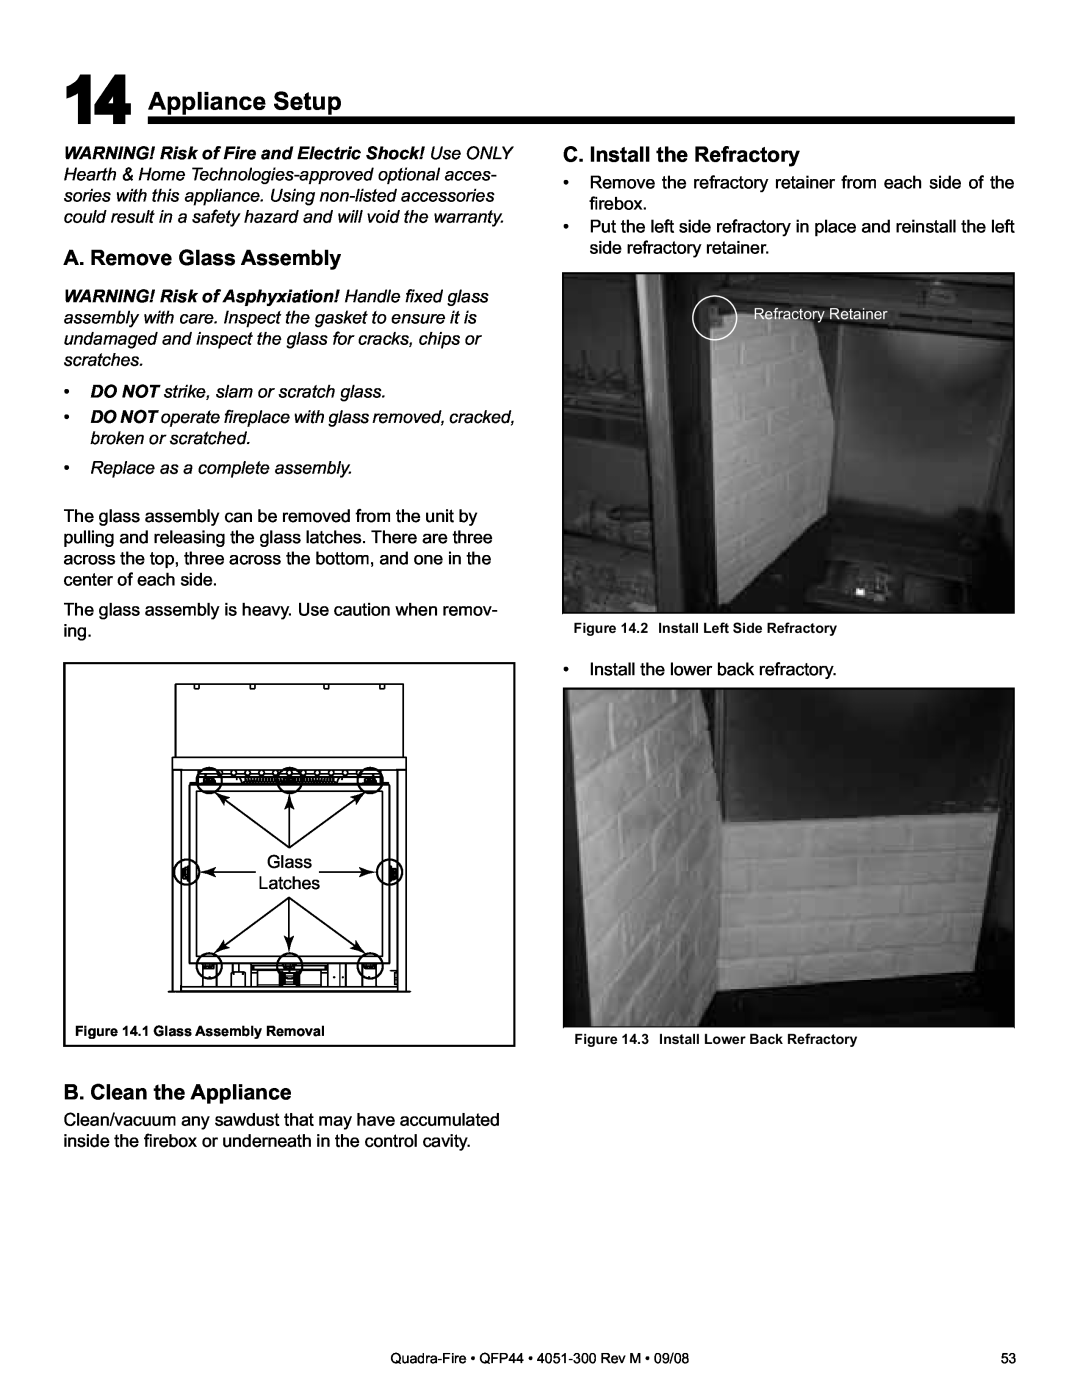 Quadra-Fire QFP44 owner manual Appliance Setup, A. Remove Glass Assembly, C. Install the Refractory, B. Clean the Appliance 